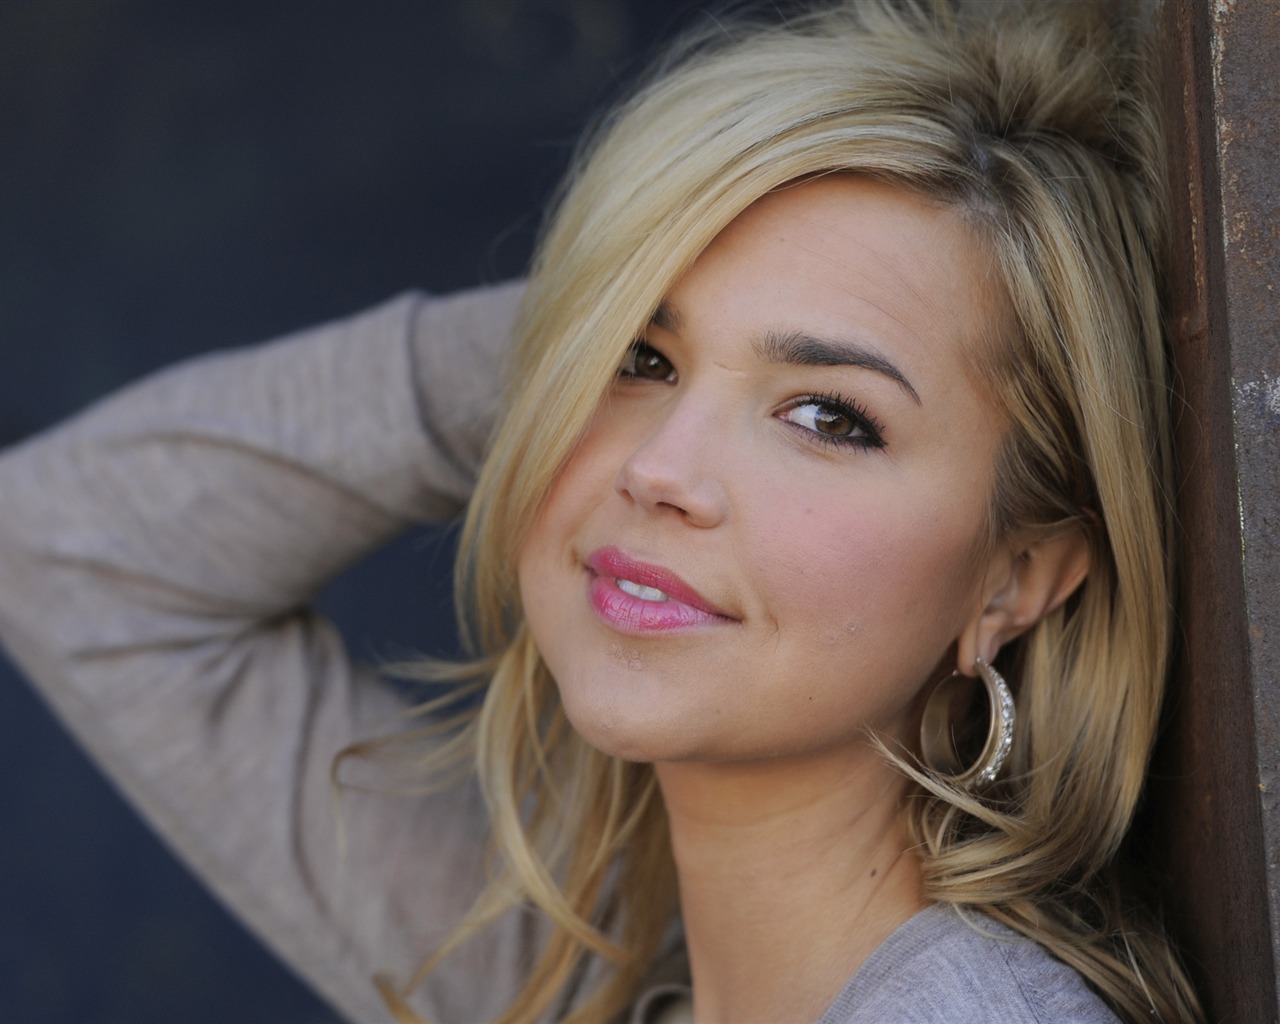 Arielle Kebbel #003 - 1280x1024 Wallpapers Pictures Photos Images